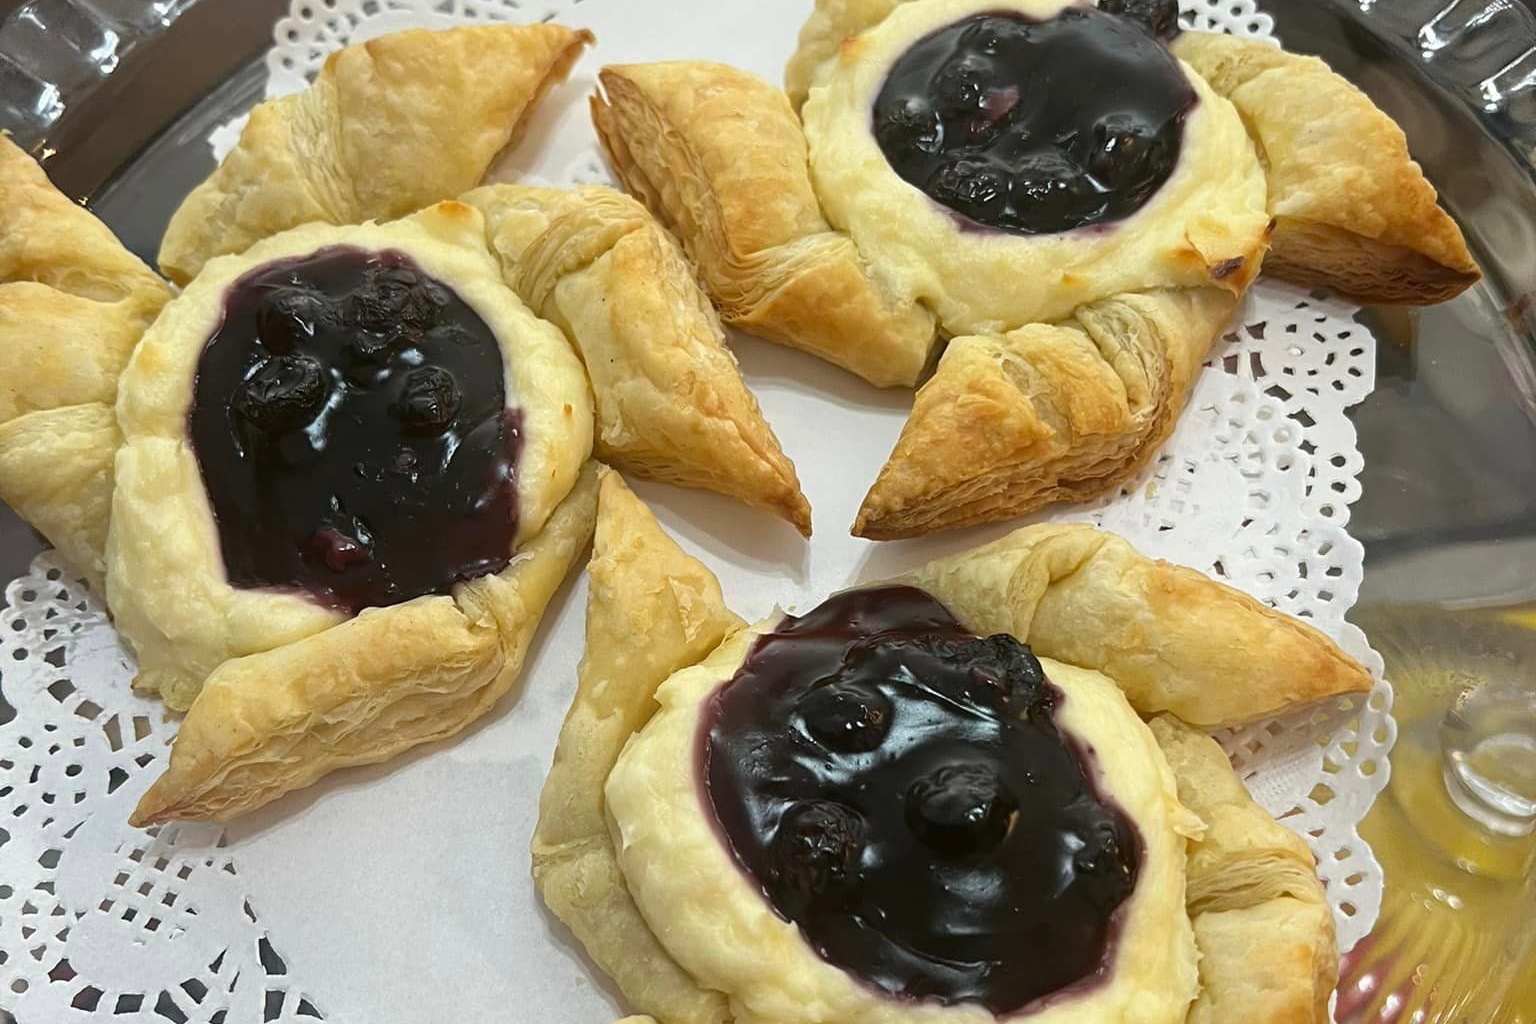 A plate of pastries